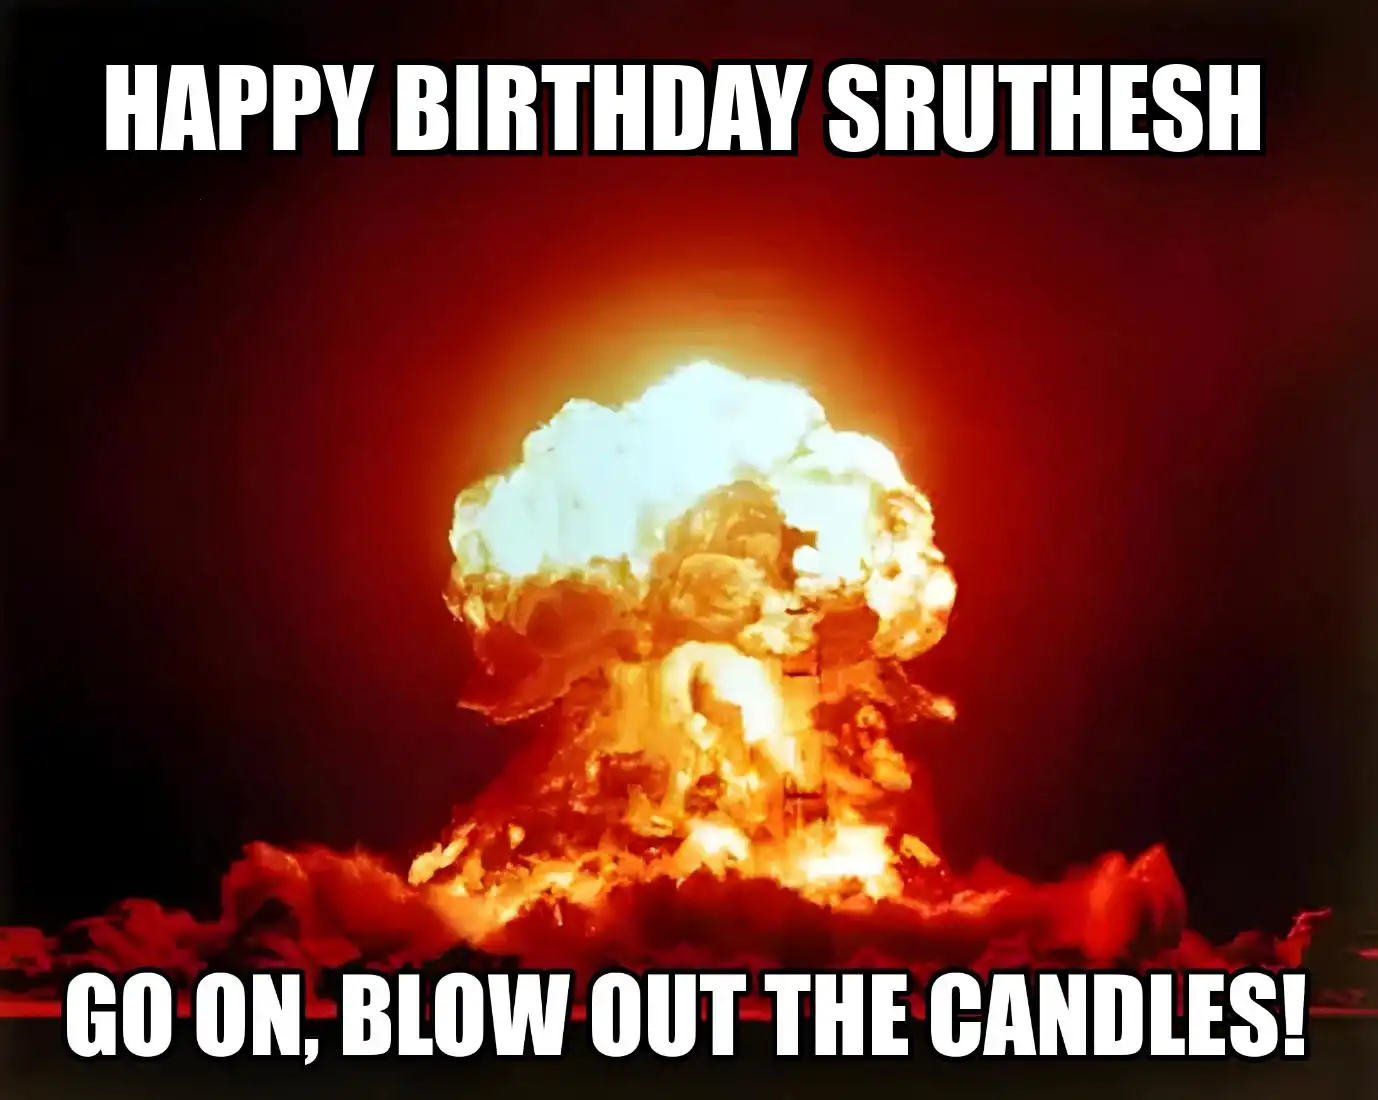 Happy Birthday Sruthesh Go On Blow Out The Candles Meme